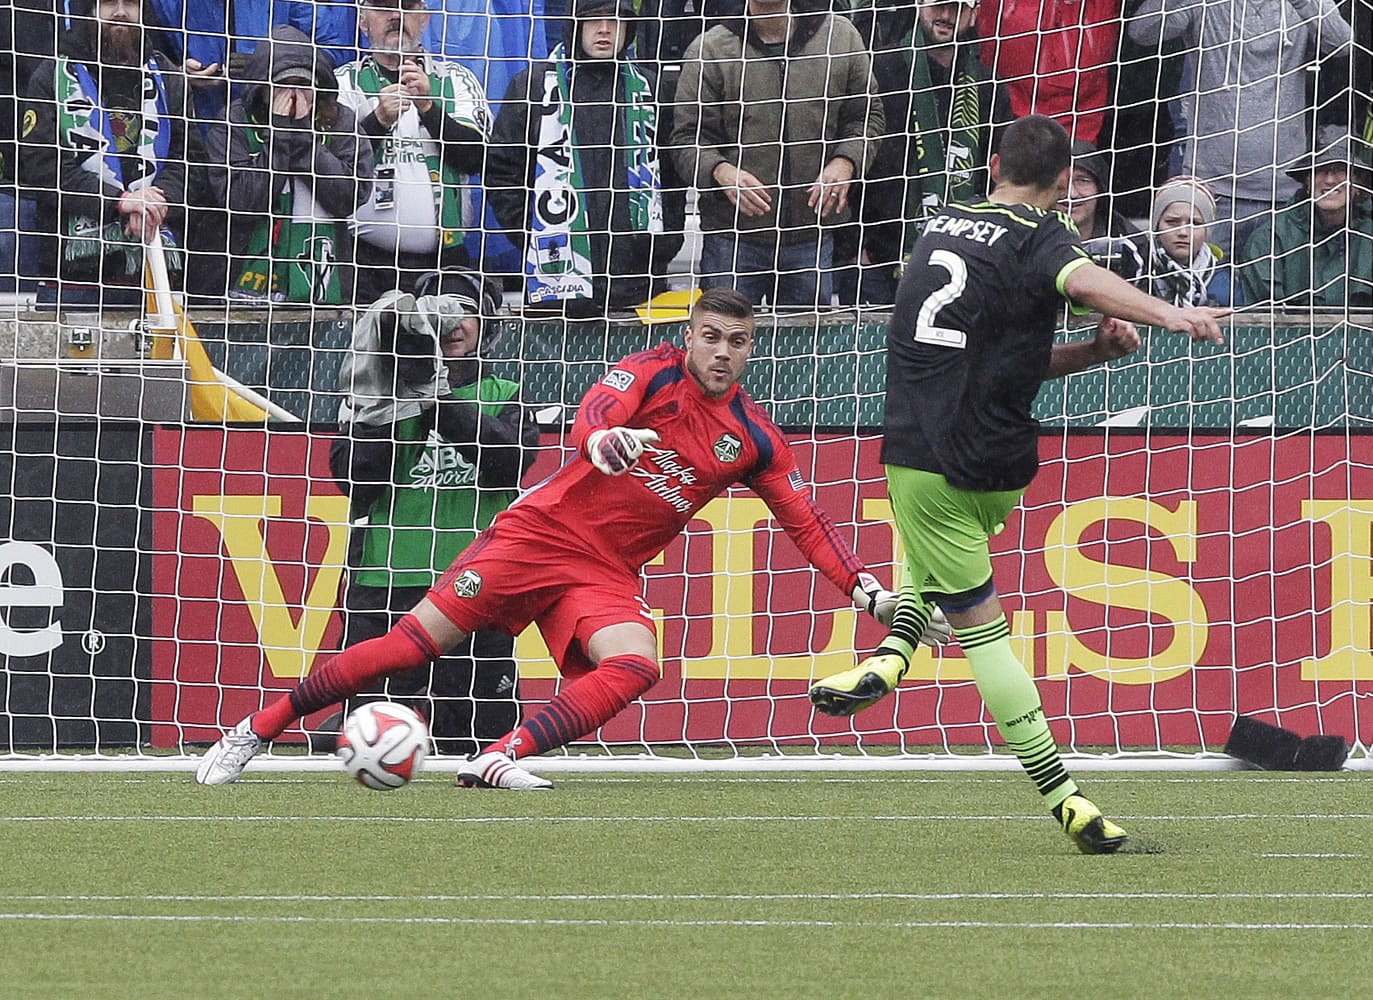 Seattle Sounders midfielder Clint Dempsey, right, scores on a penalty kick to tie the game against Portland Timbers goalkeeper Andrew Weber late in the second half of an MLS soccer game in Portland, Ore., Saturday, April 5, 2014. The two teams tied 4-4.